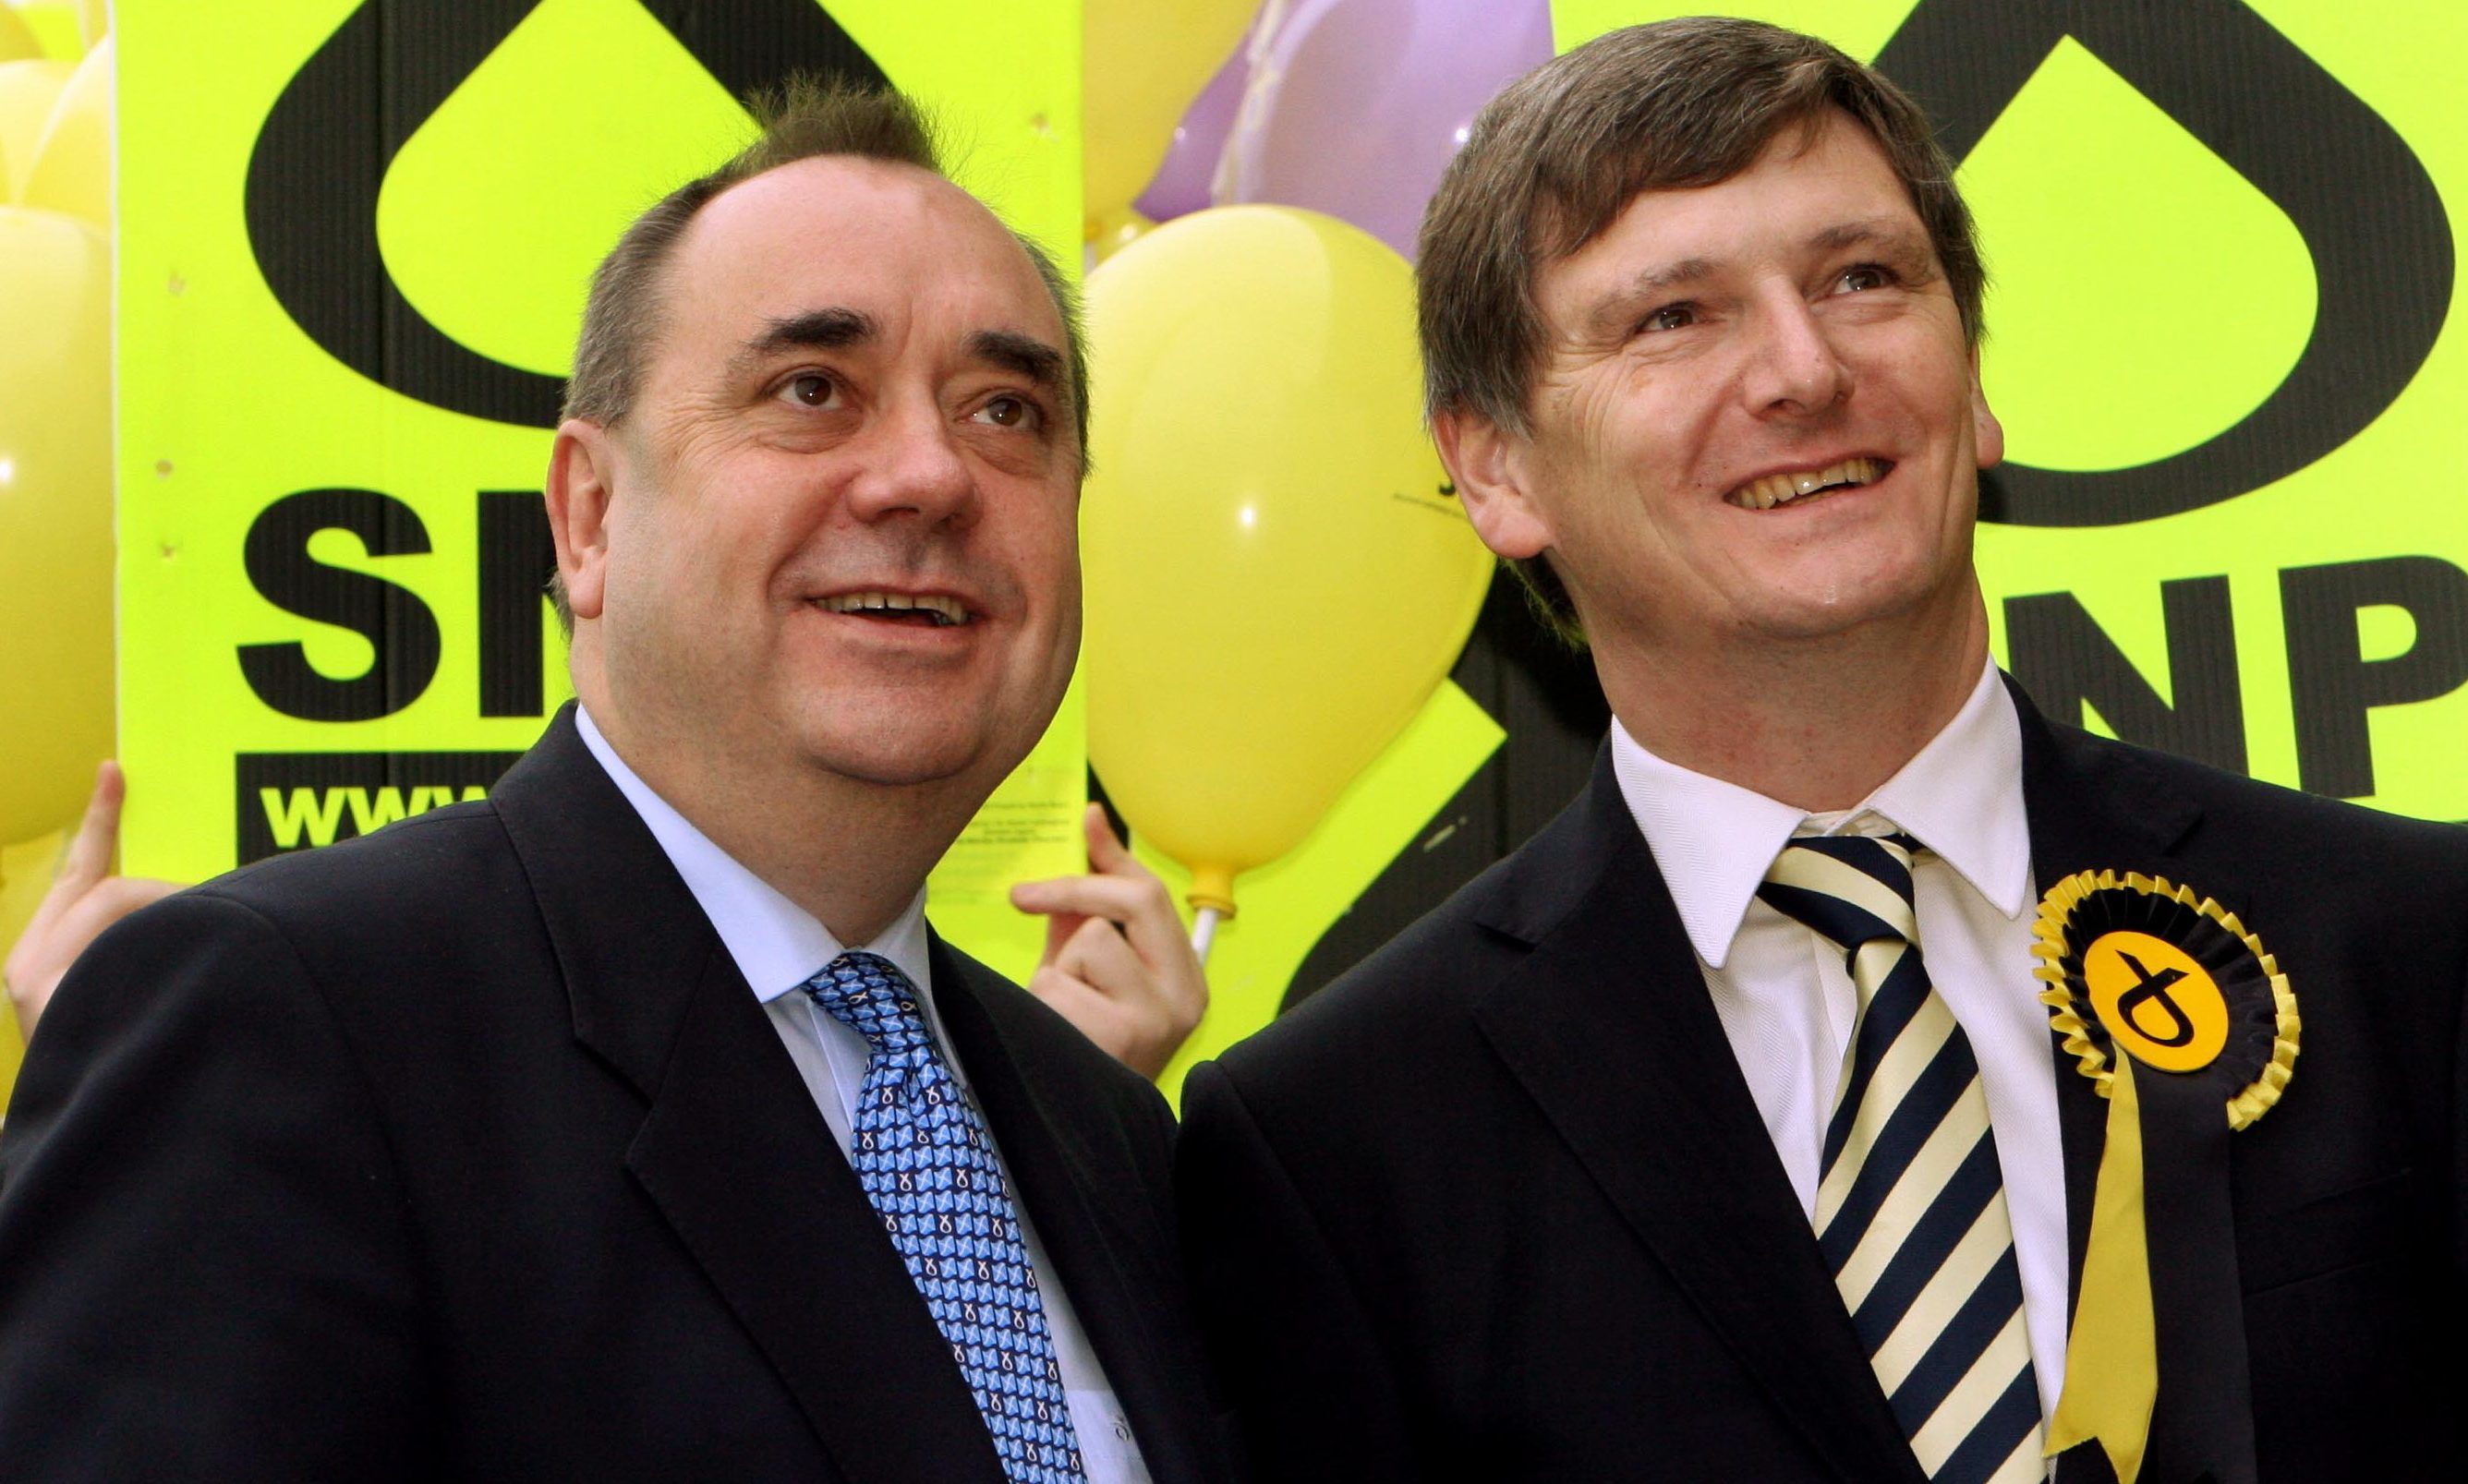 Then SNP leader Alex Salmond campaigning with candidate Peter Grant ahead of the 2008 by-election in Glenrothes. Critics say the party spent more on that single poll than in fighting for a Remain vote in the EU referendum.